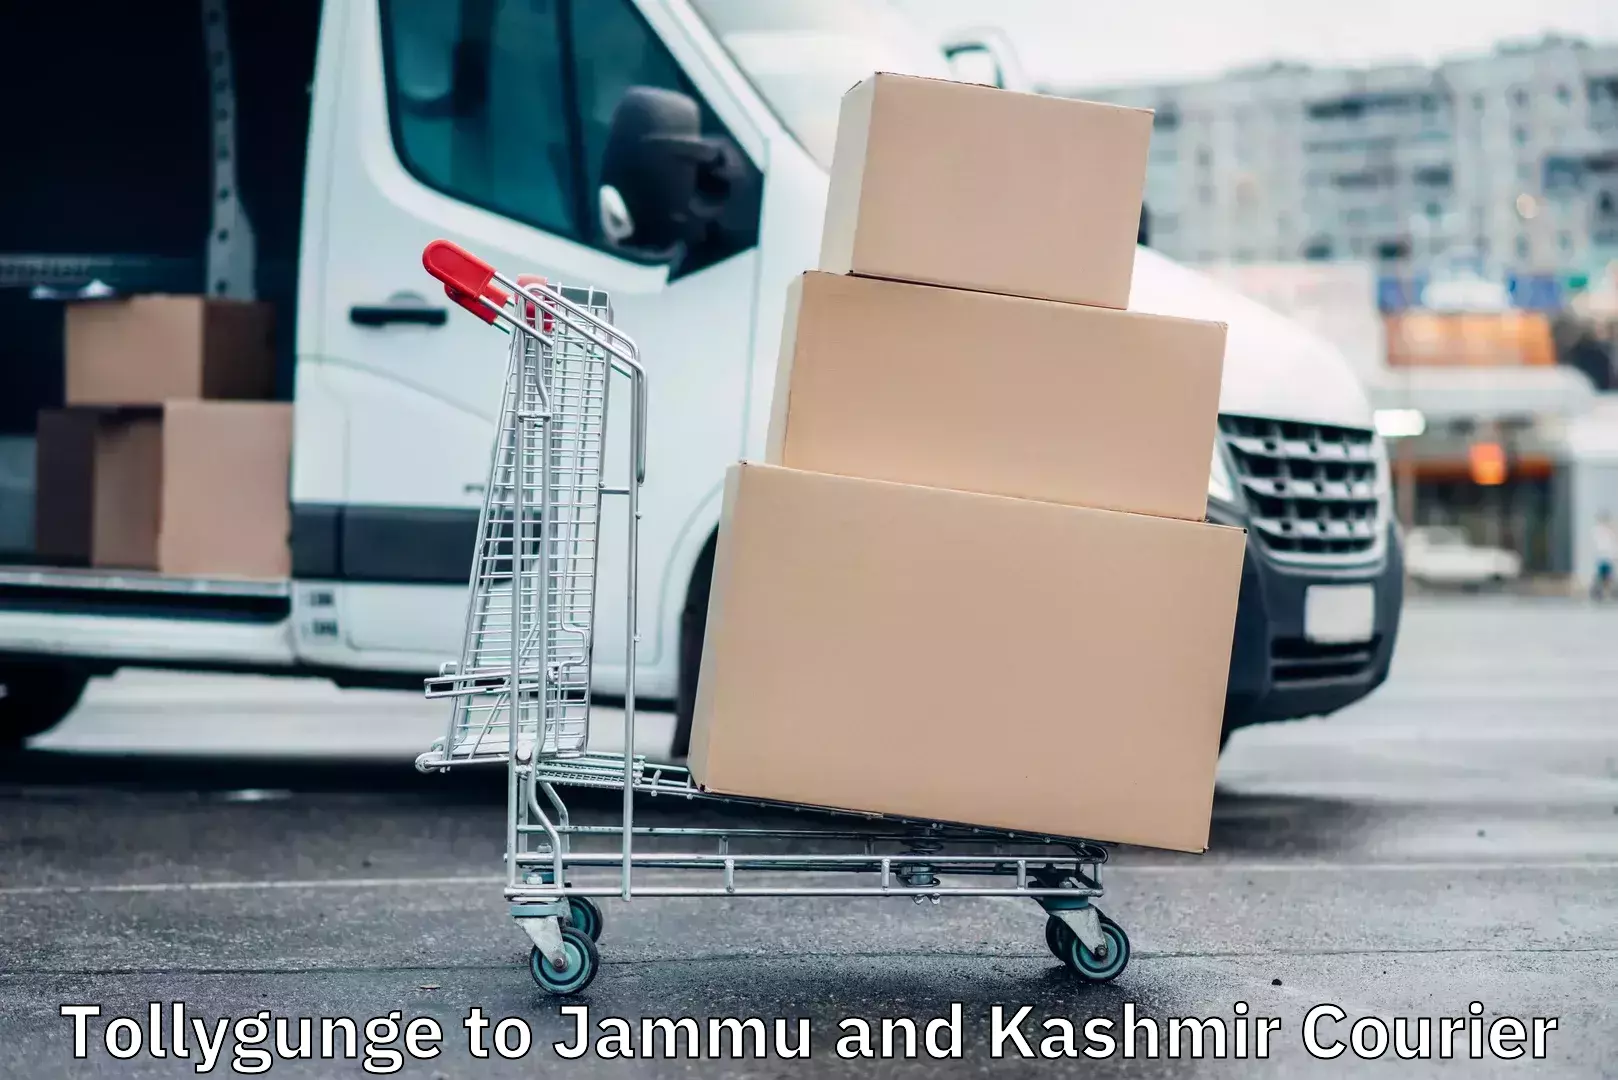 Personal parcel delivery in Tollygunge to Jammu and Kashmir